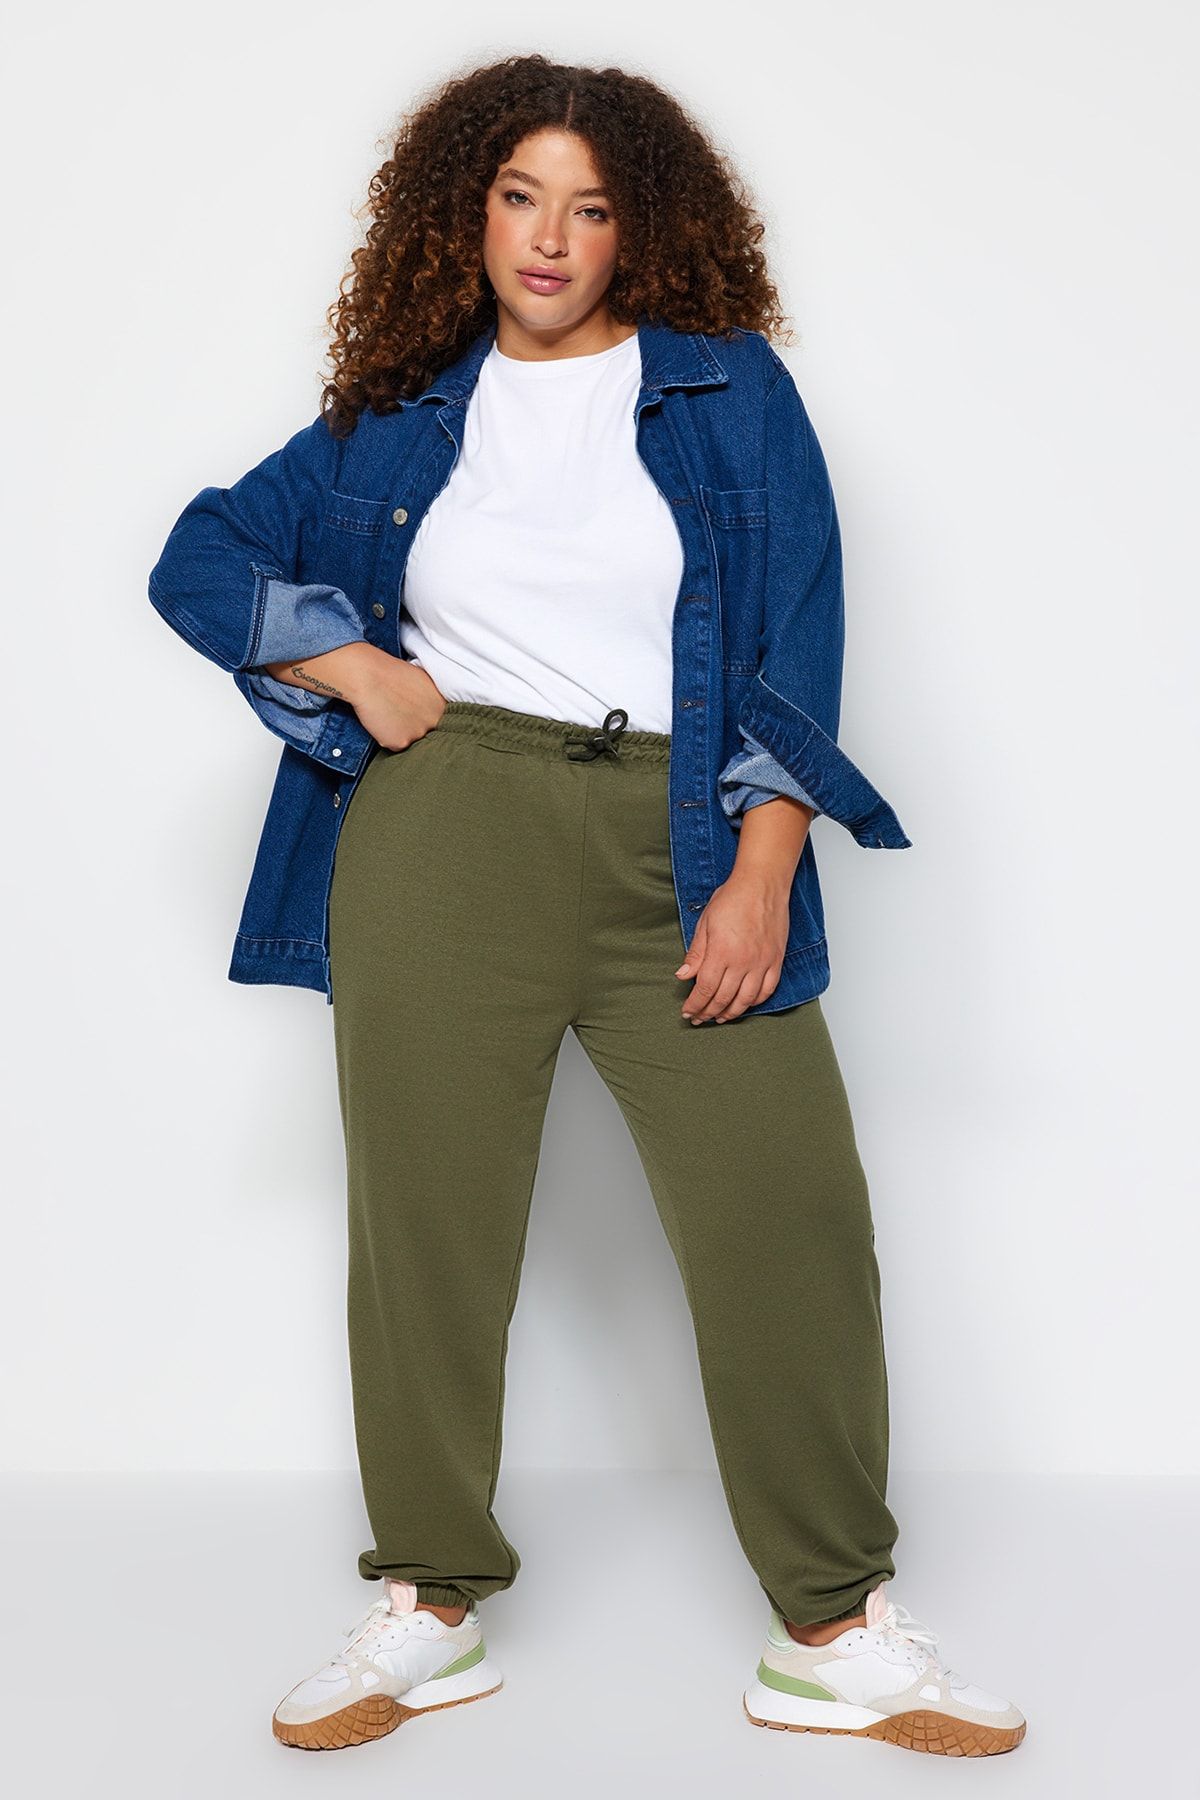 How To Style Sweatpants Plus Size Edition